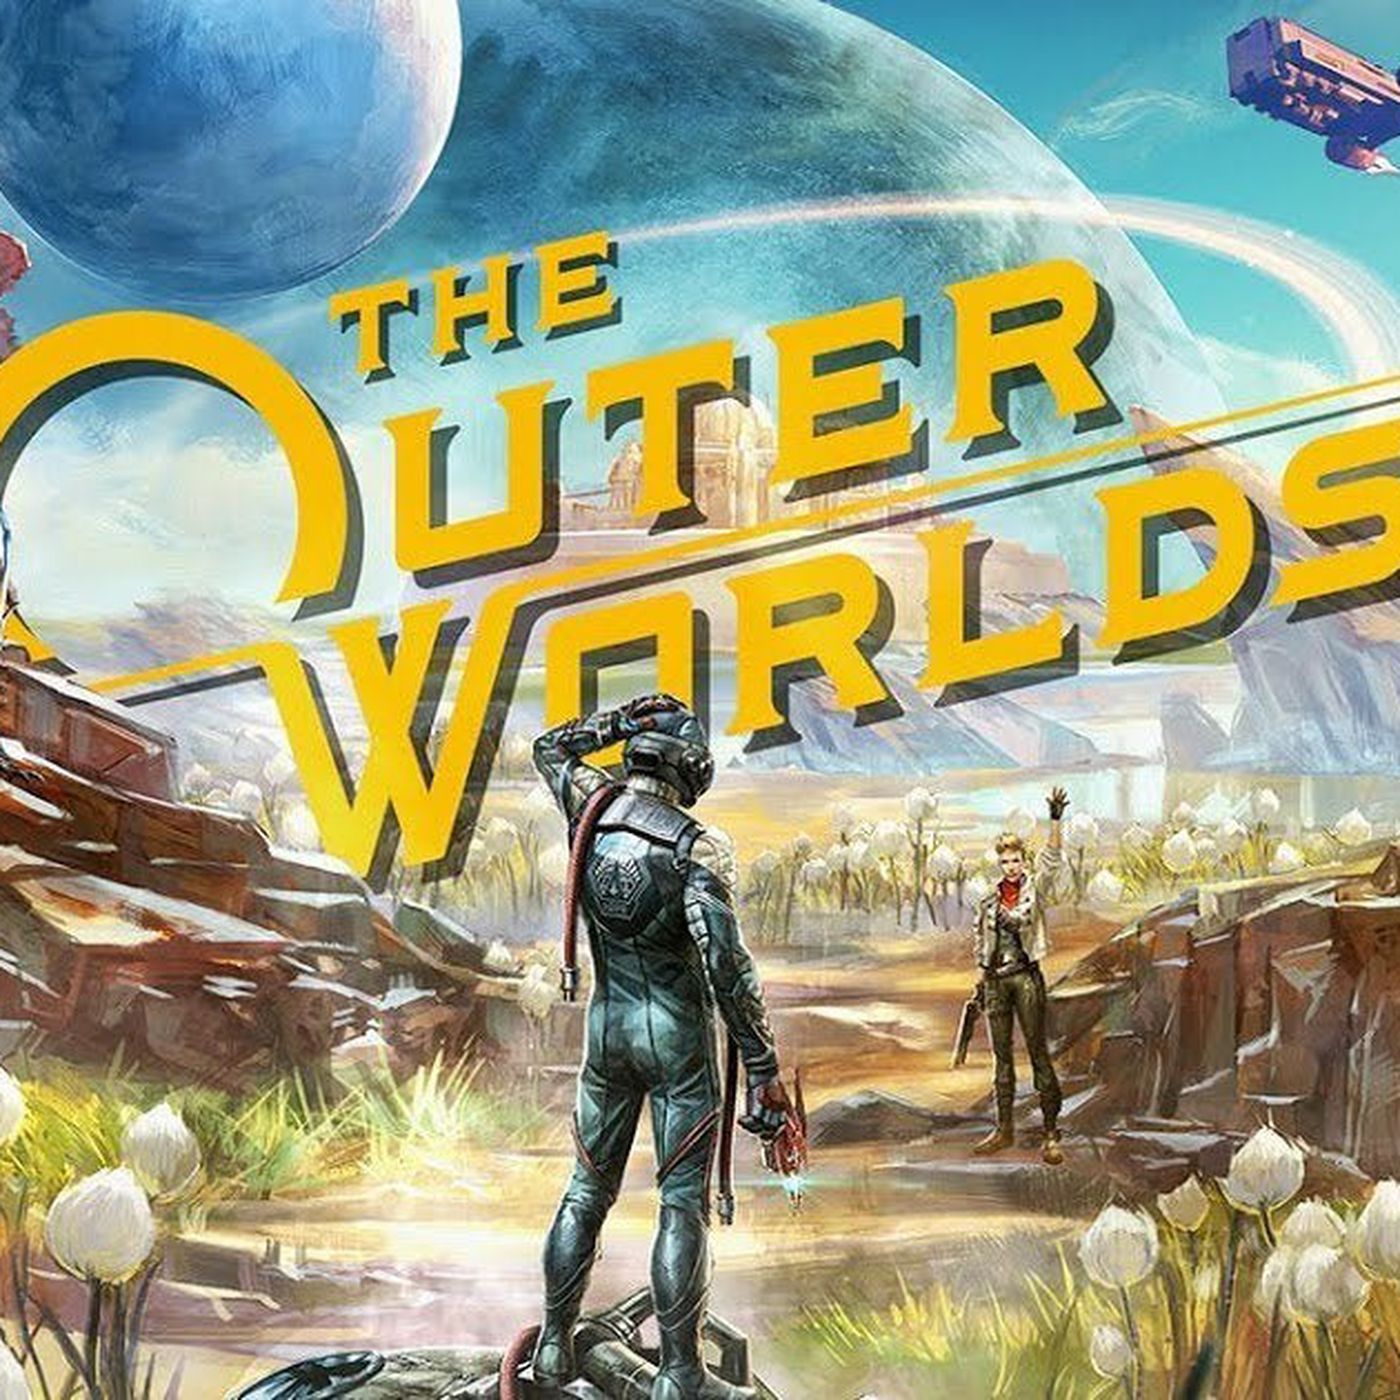 The Outer Worlds Is Coming To The Nintendo Switch On March 6th